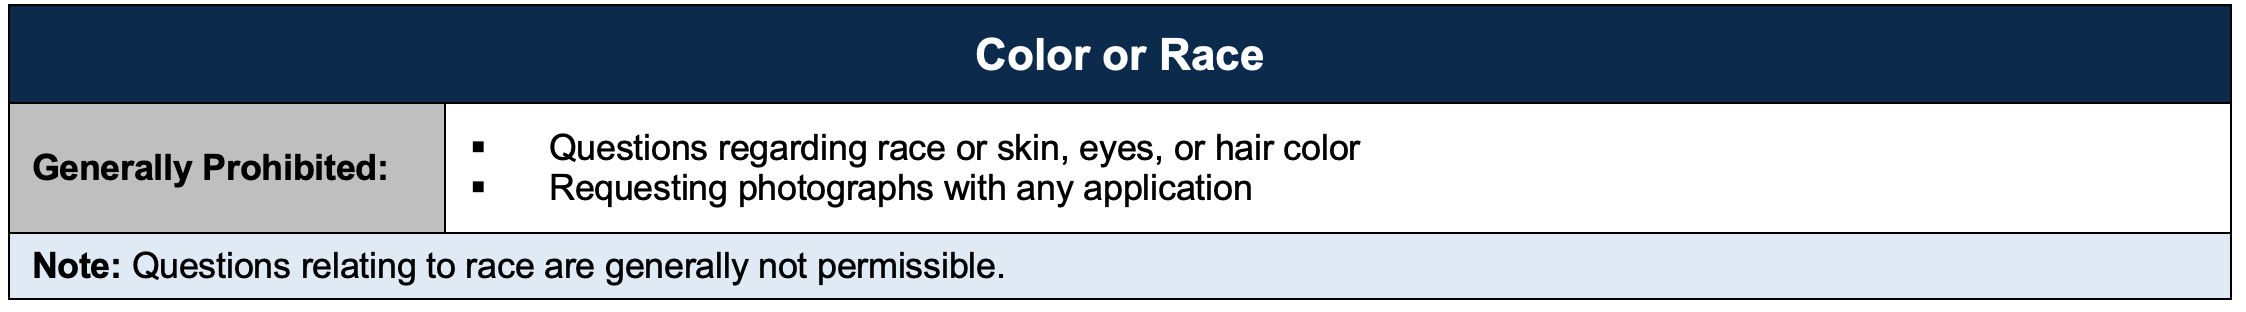 Color or Race